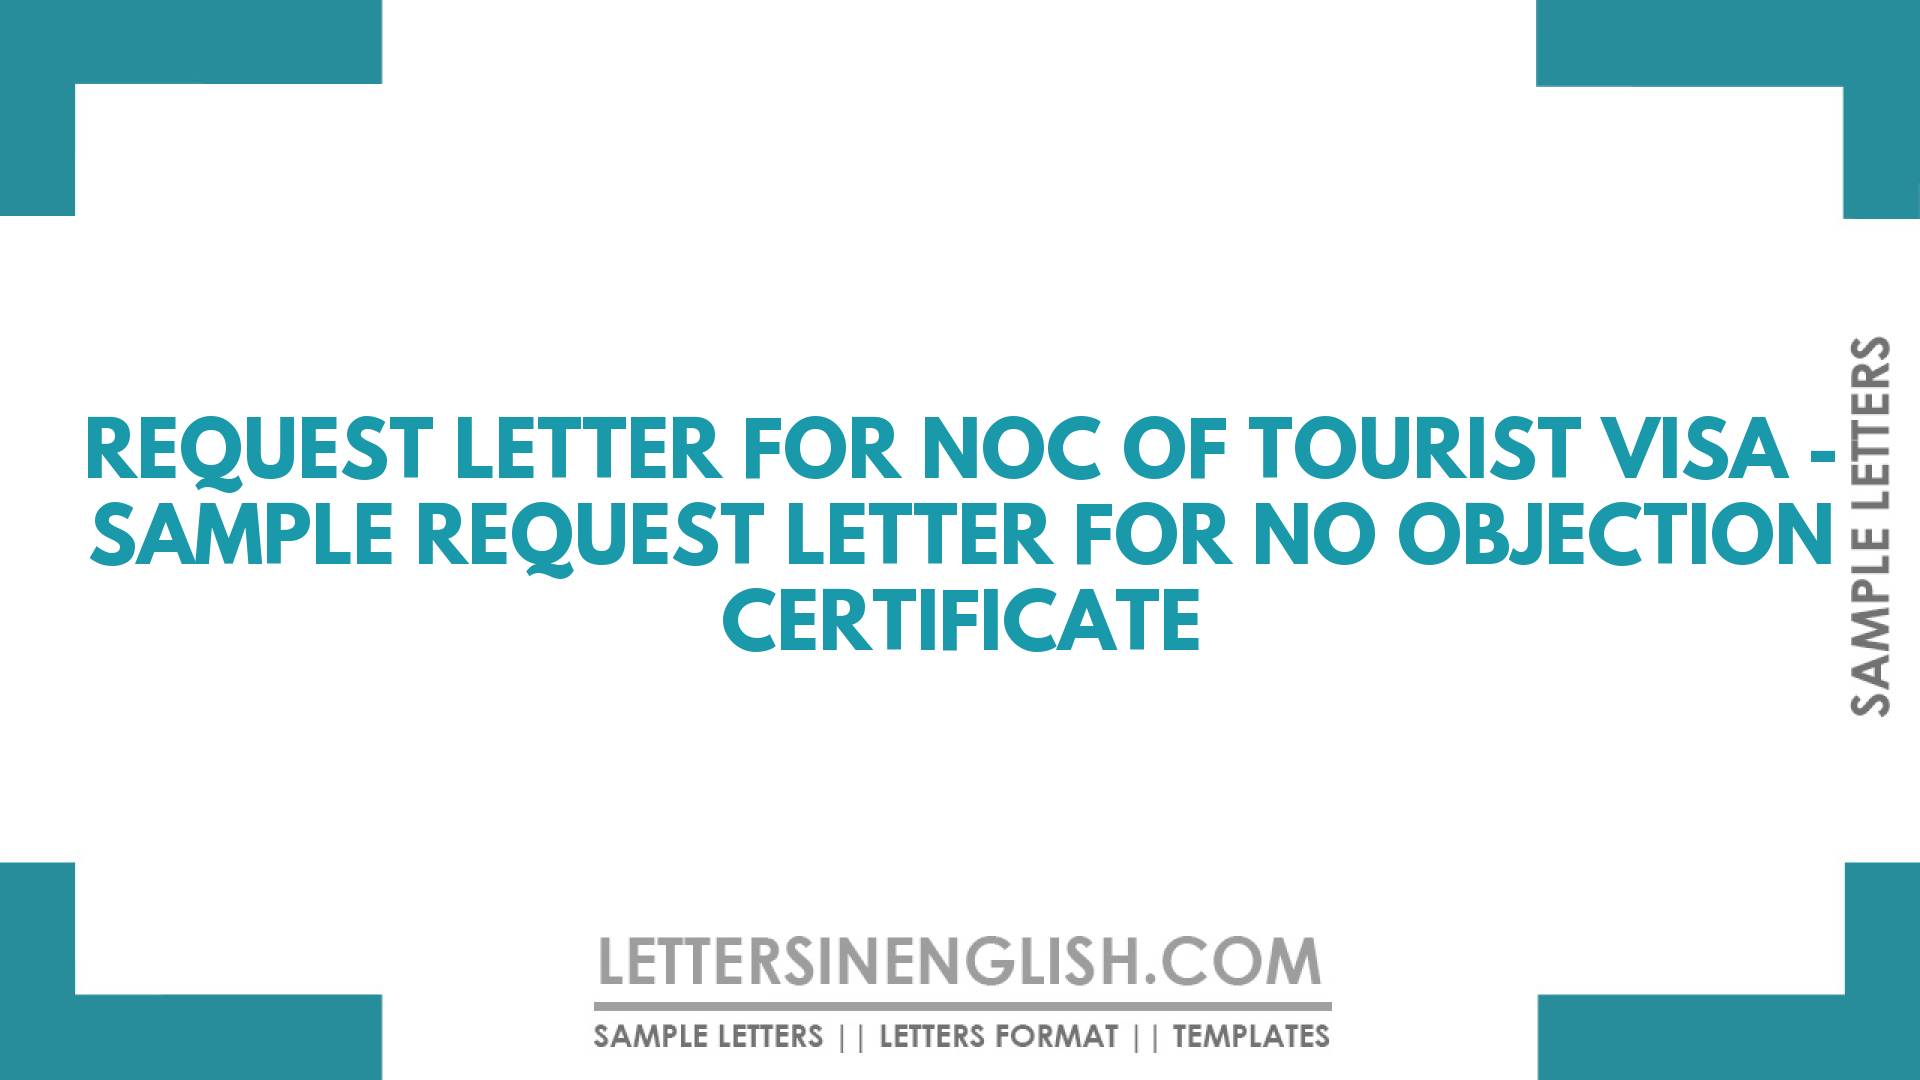 Request Letter for NOC of Tourist Visa – Sample Request Letter for No Objection Certificate